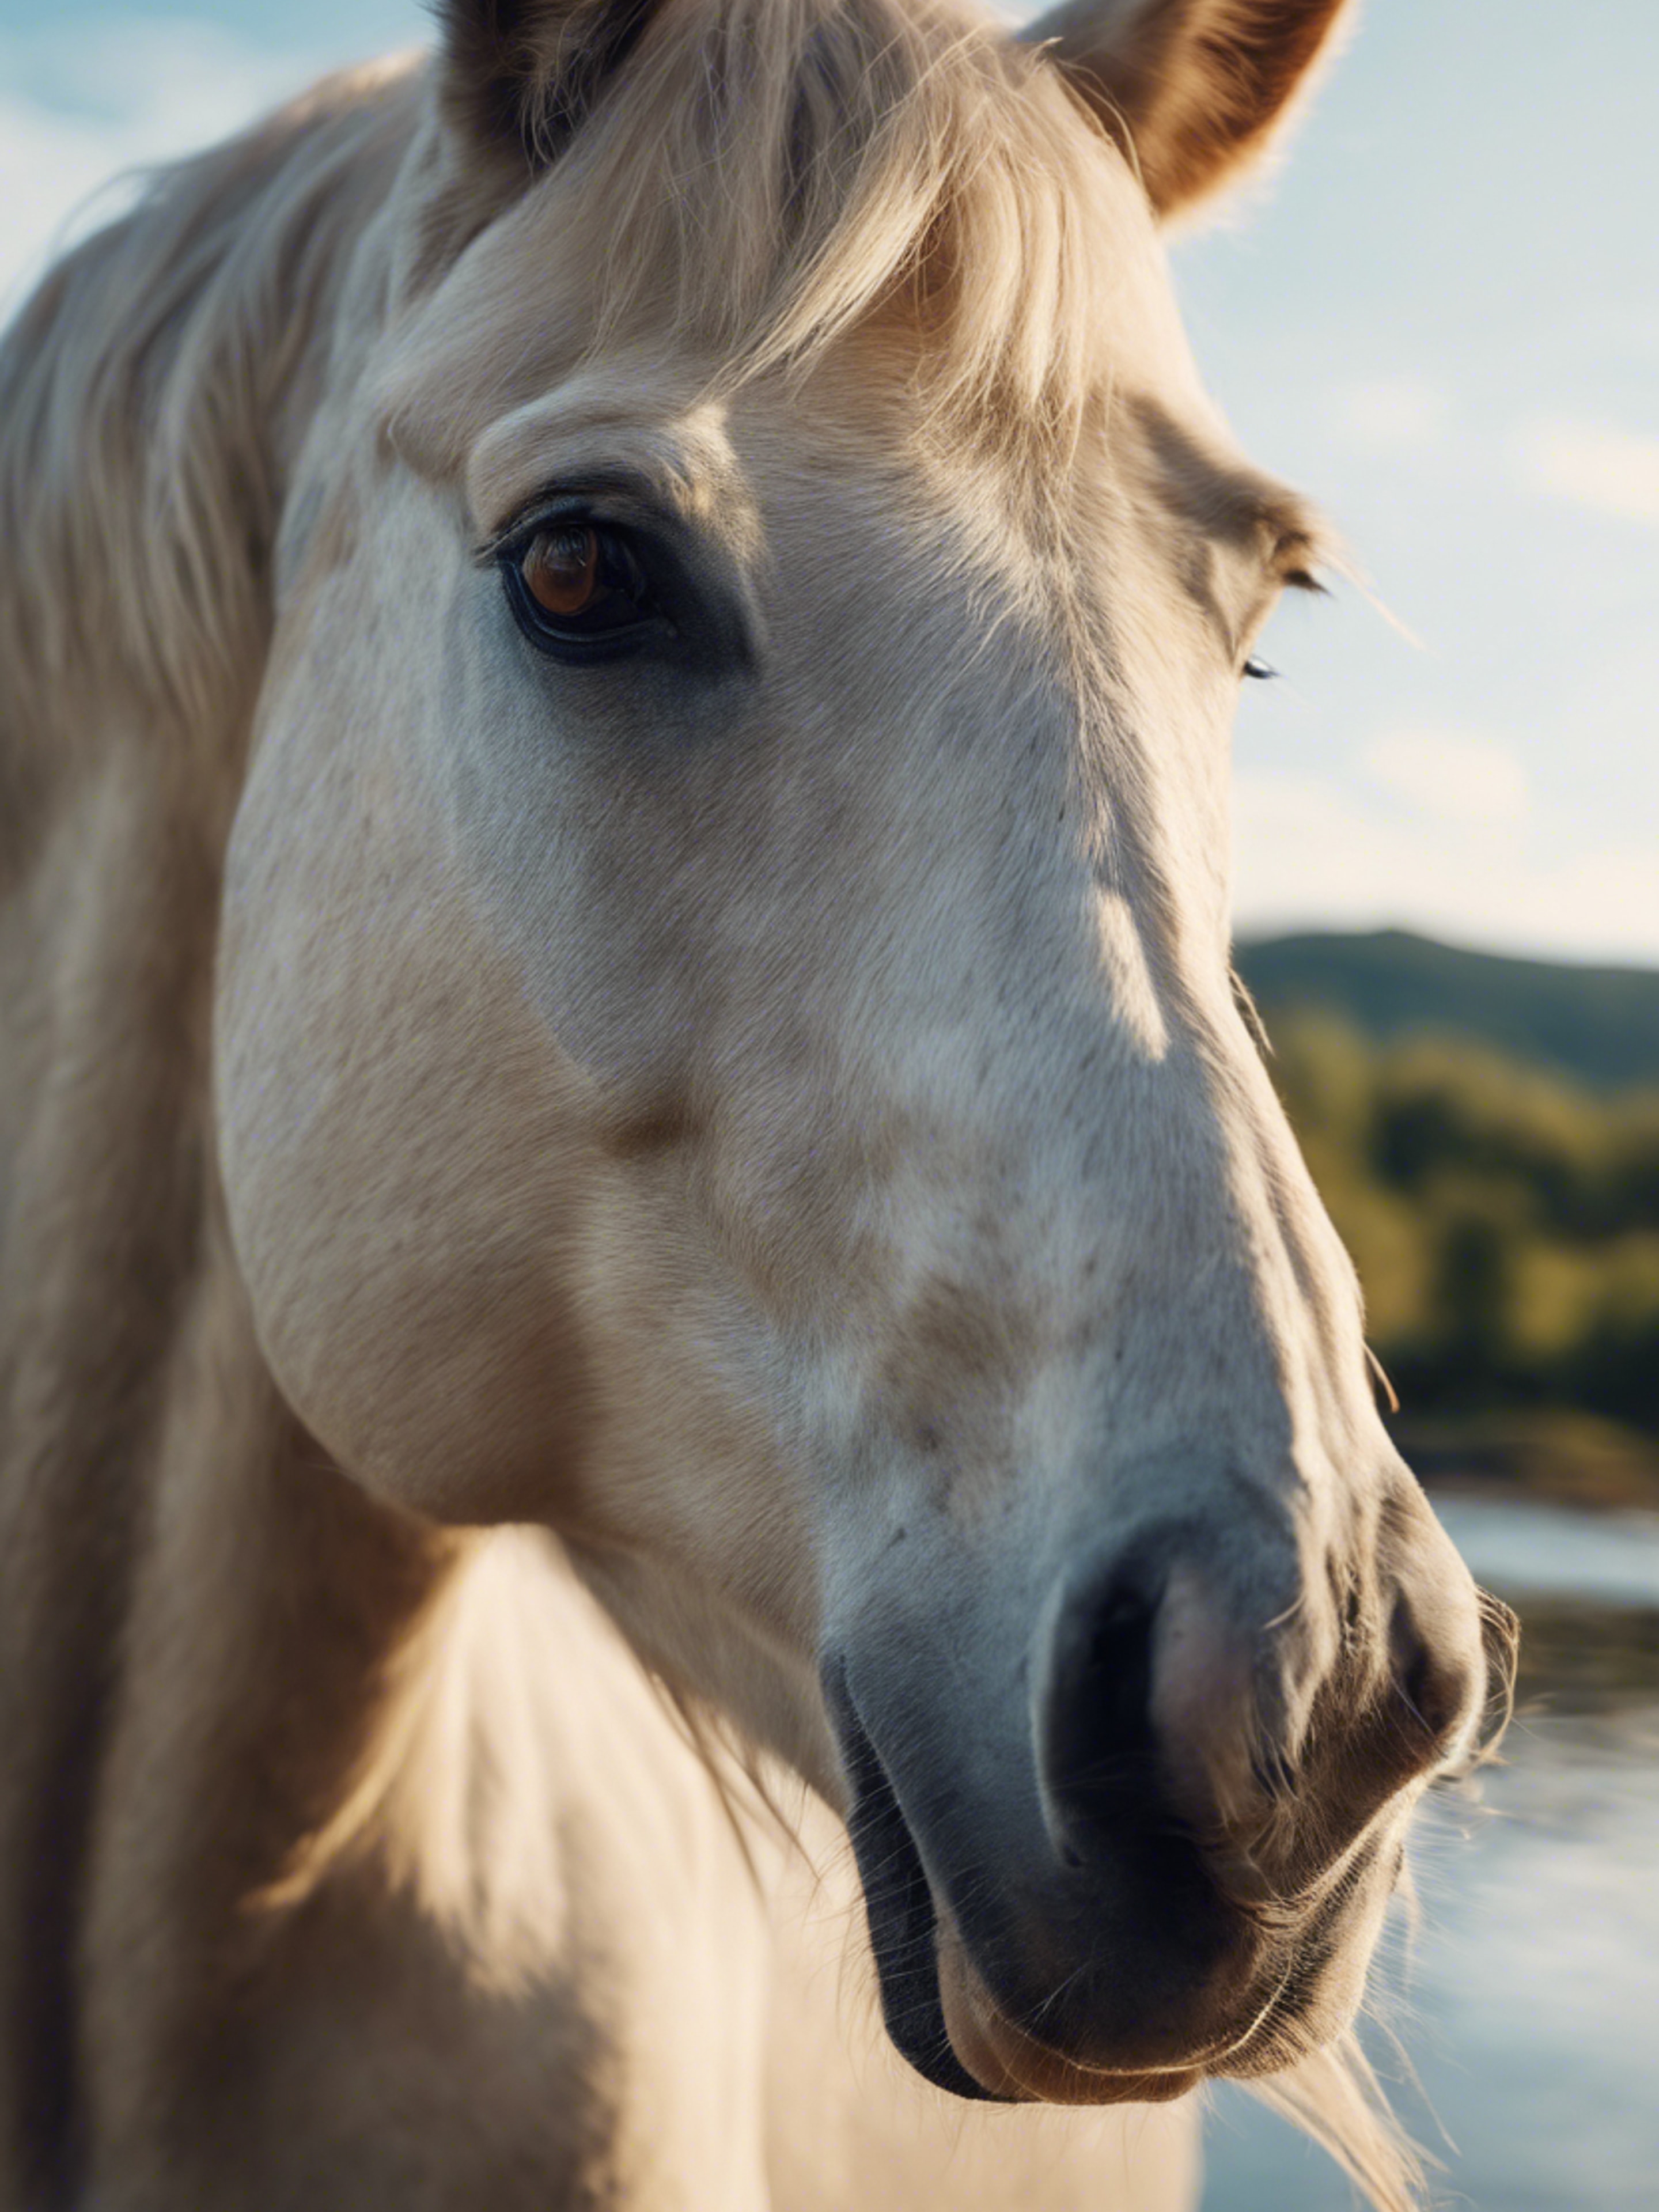 Close up of a beige horse with blue eyes, against a tranquil river backdrop.壁紙[d2505e2991e64a2486f2]